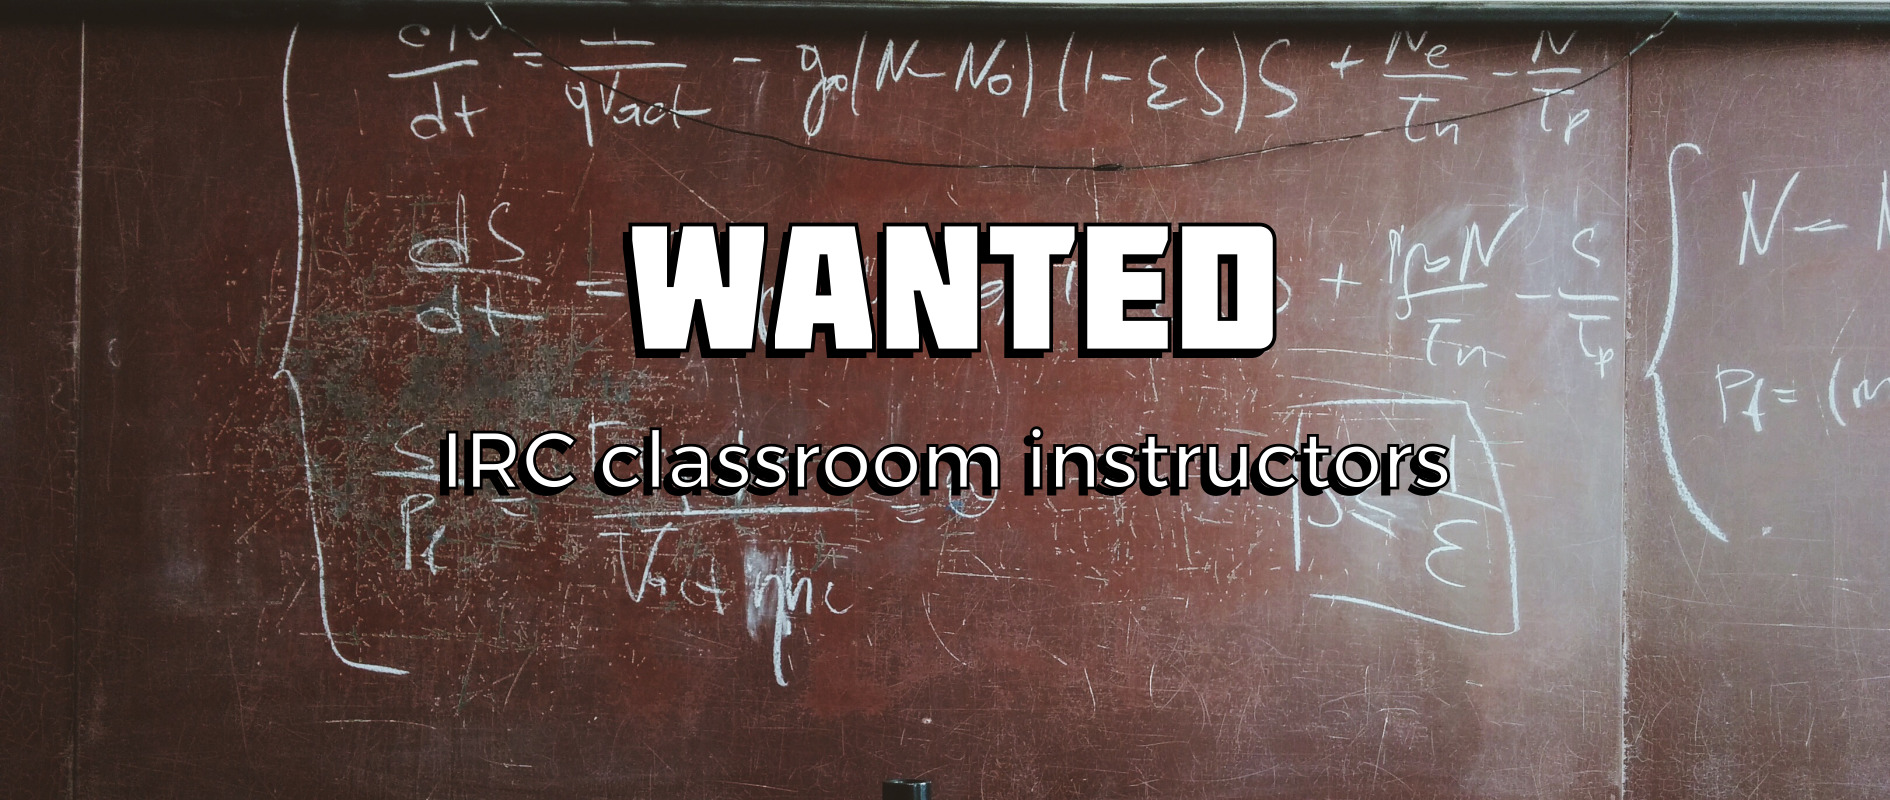 IRC classroom instructors wanted